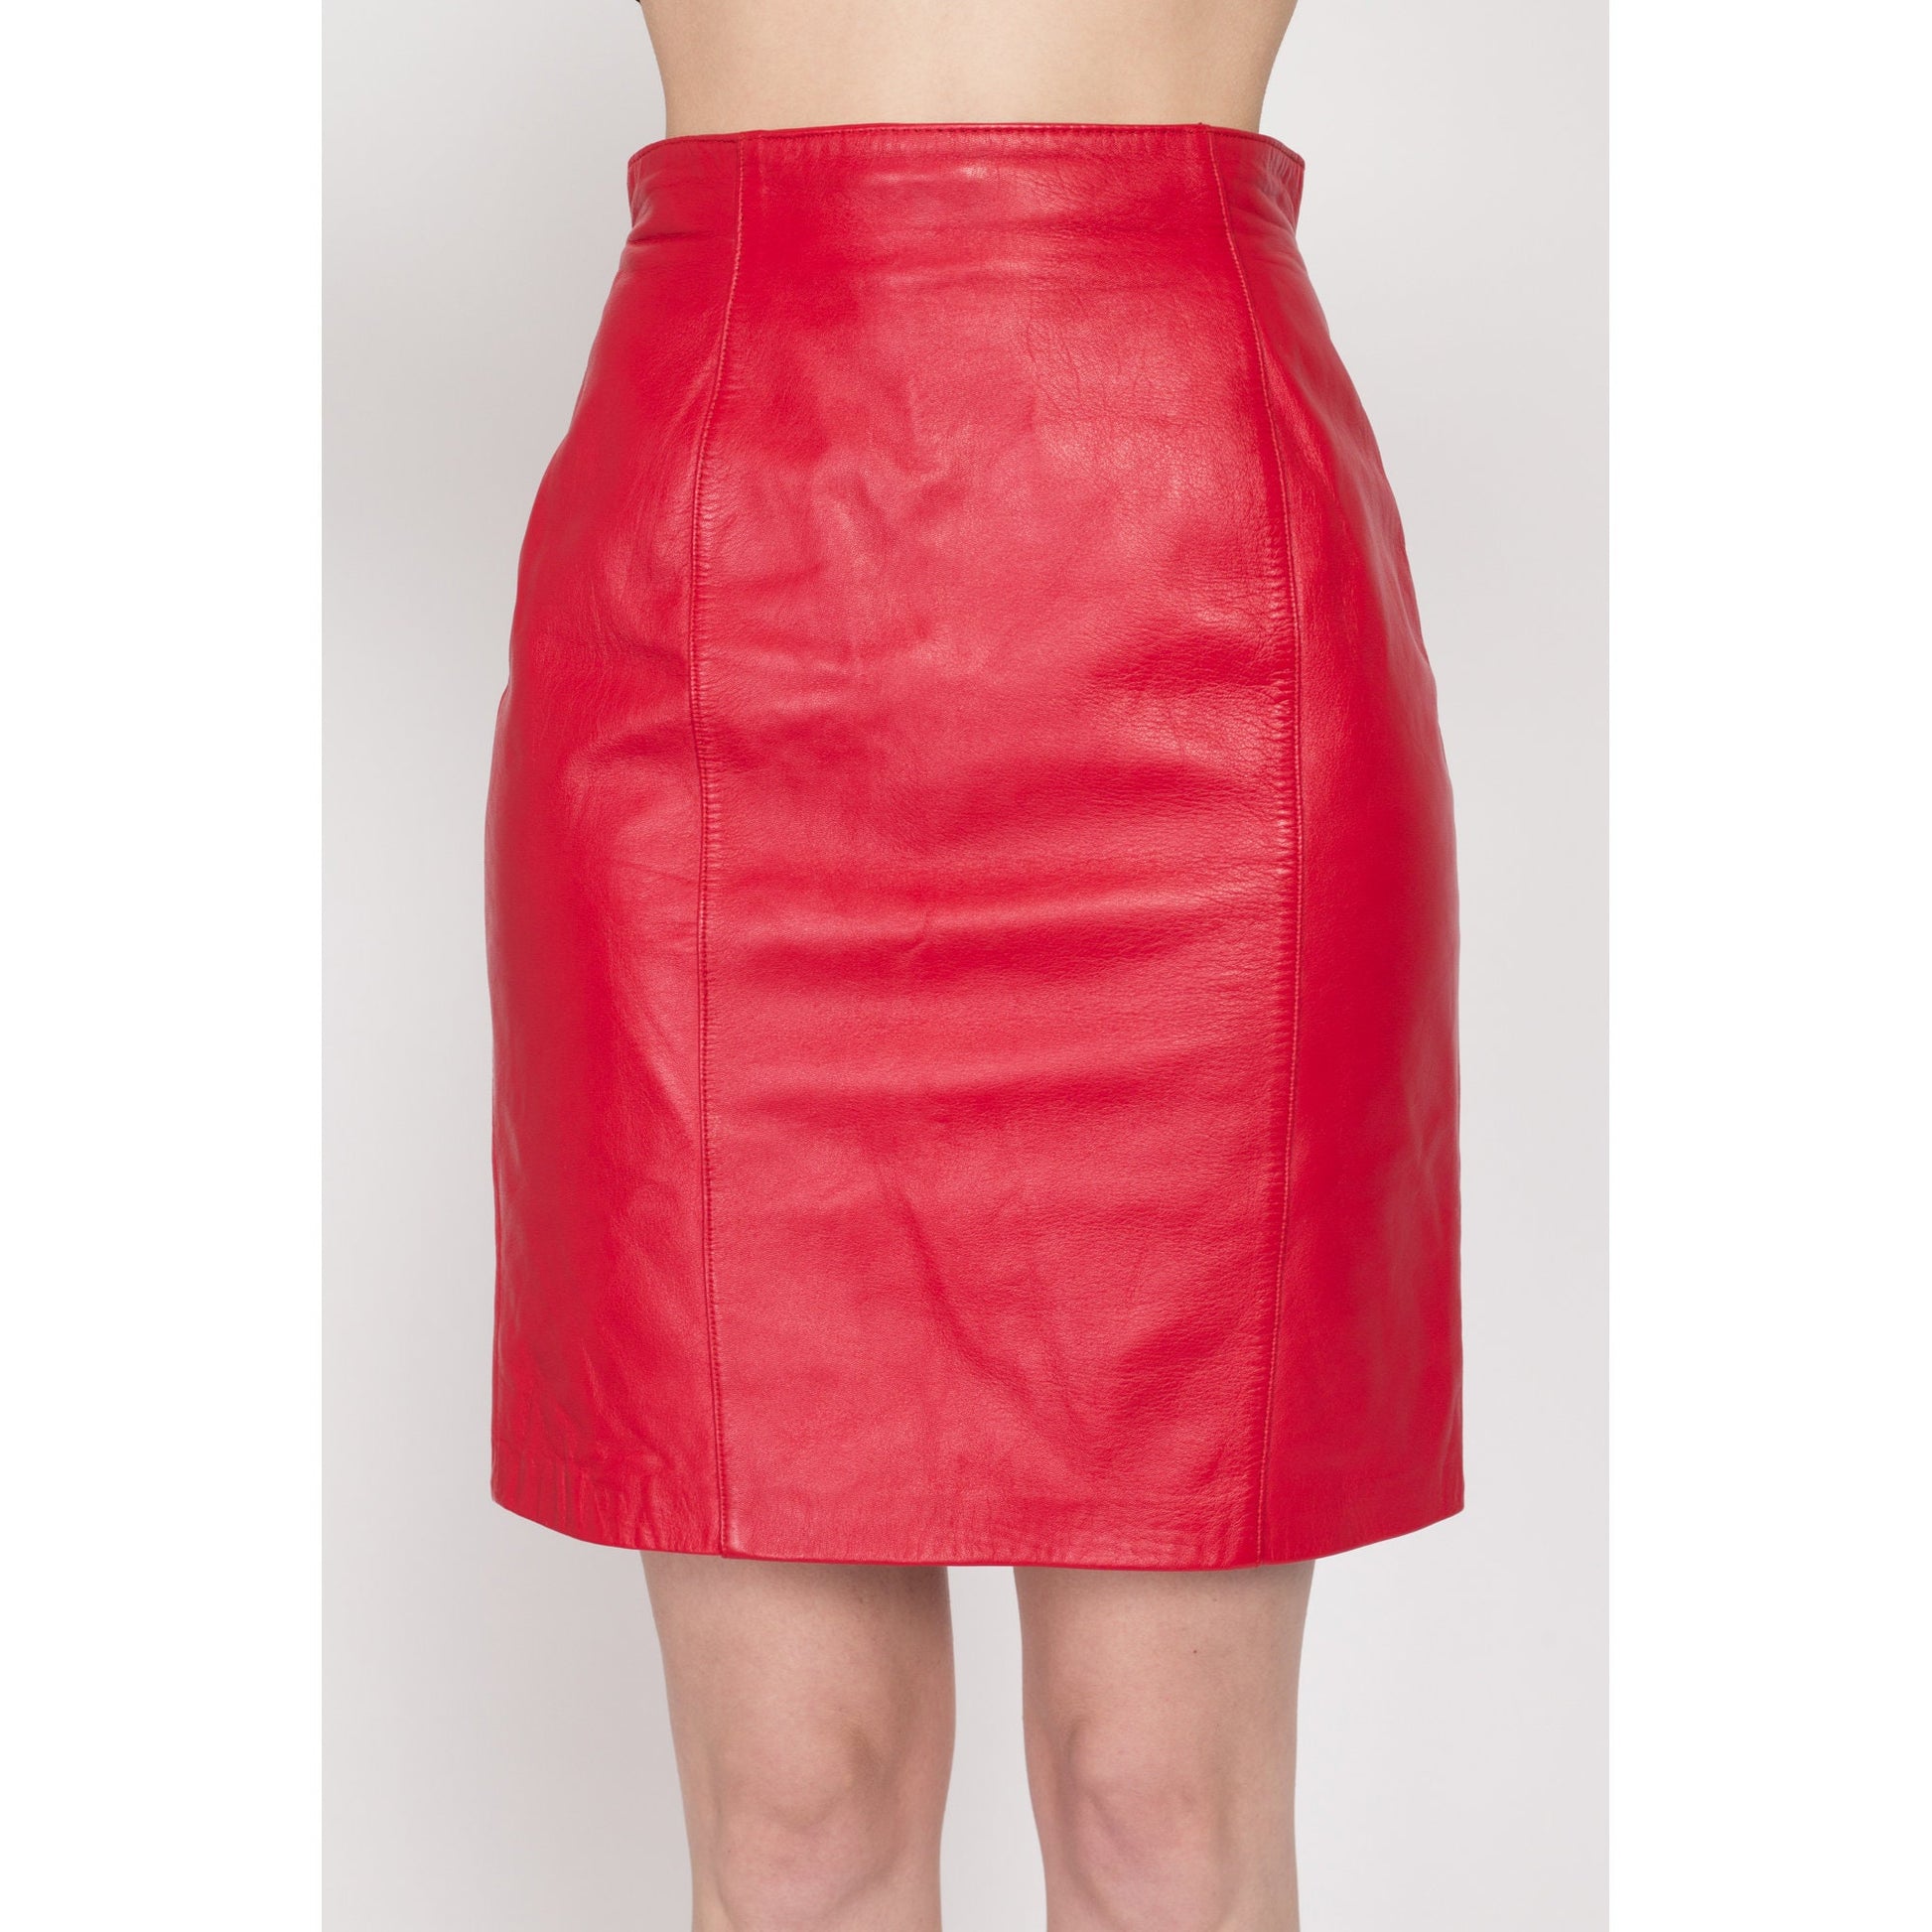 Small 90s Red Leather Pencil Skirt | Vintage High Waisted Rocker Fitted Mini Skirt